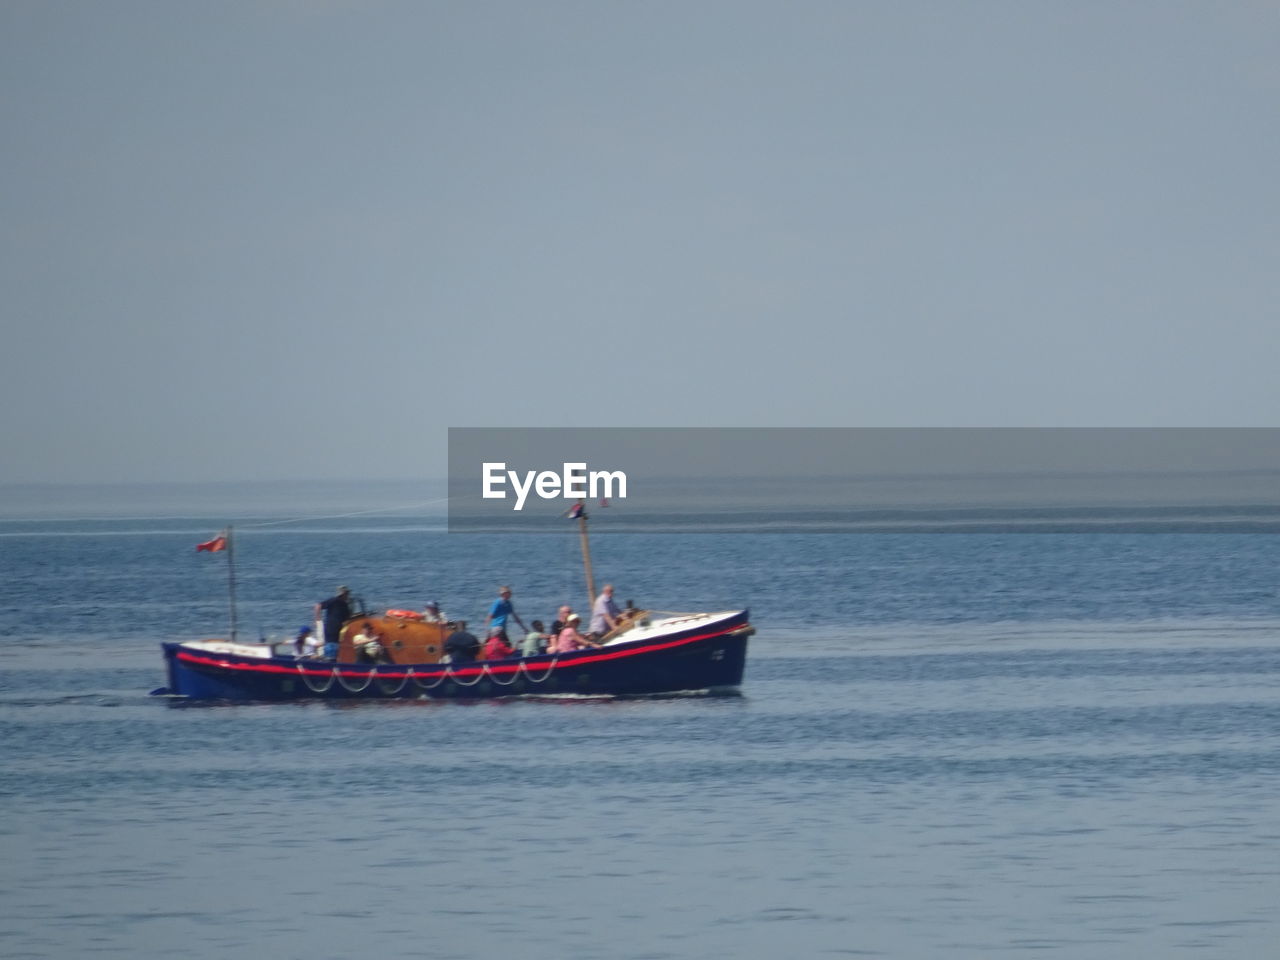 VIEW OF BOAT IN SEA AGAINST CLEAR SKY